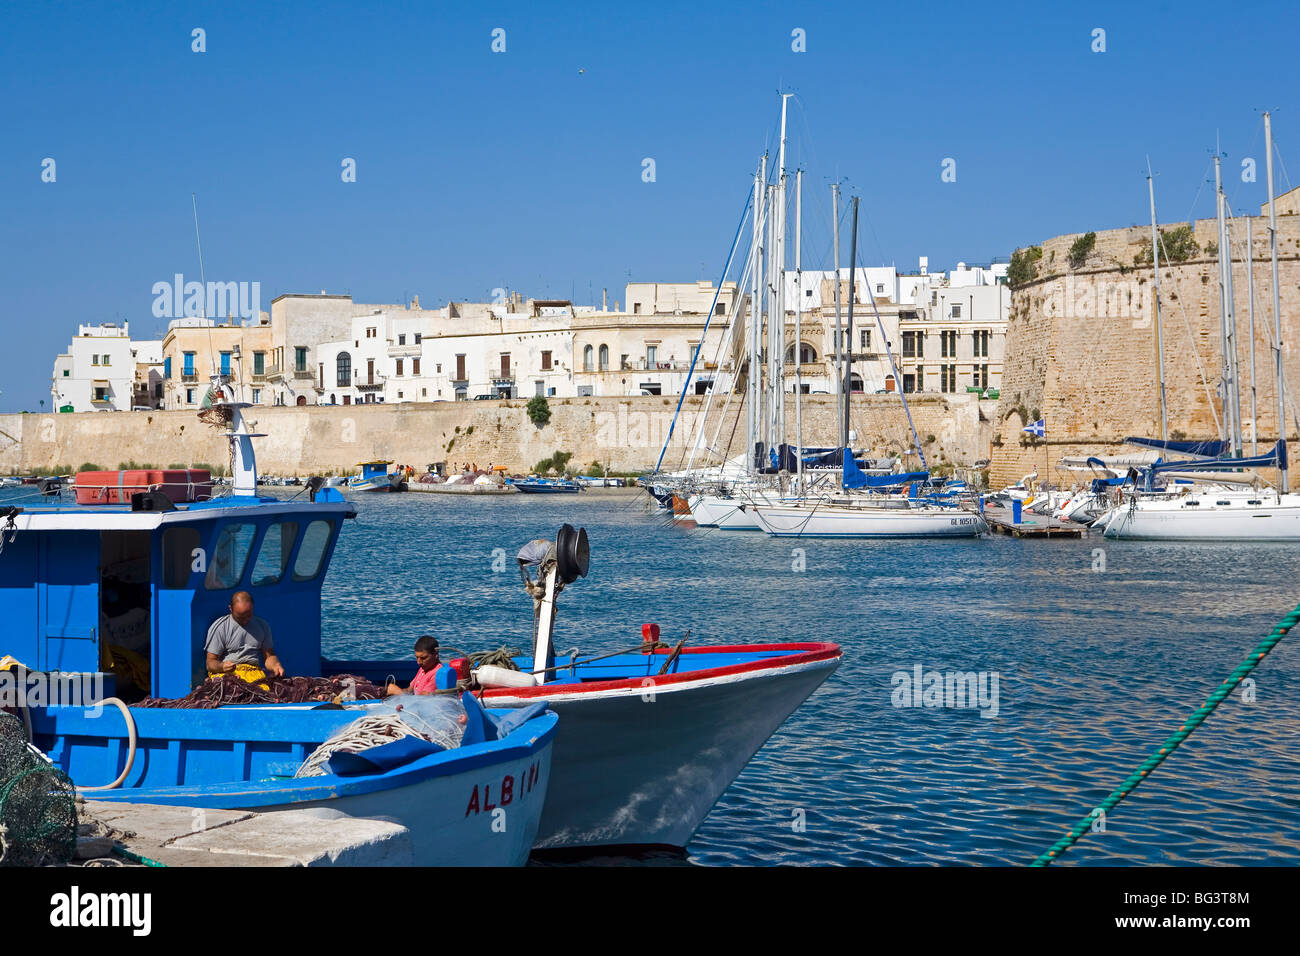 The castle and Old Town, Gallipoli, Lecce province, Puglia, Italy, Europe Stock Photo